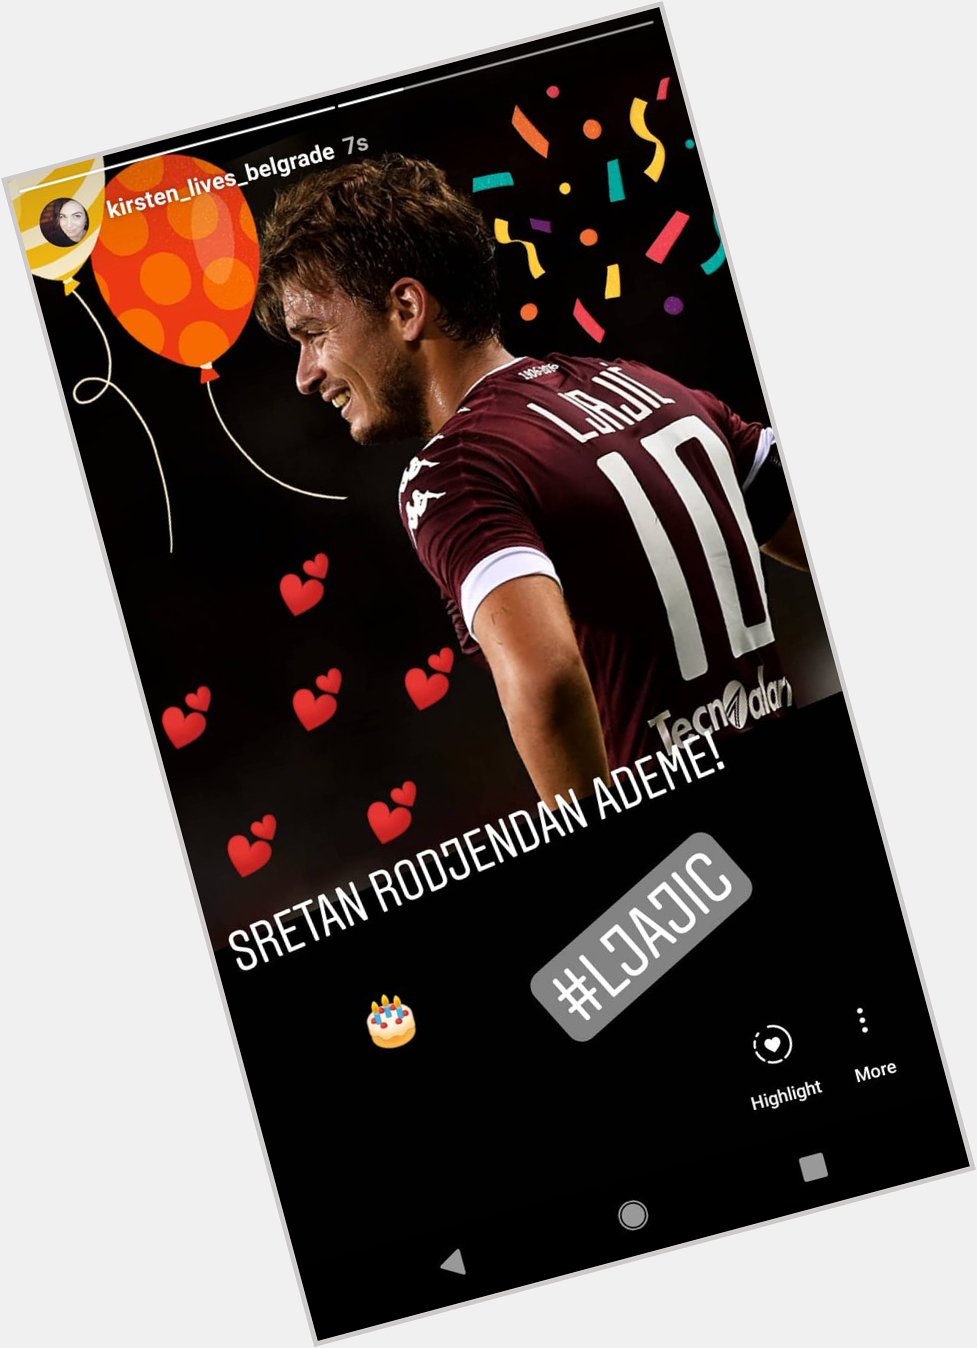 And now, a very happy birthday to the one, the only, Adem Ljajic   